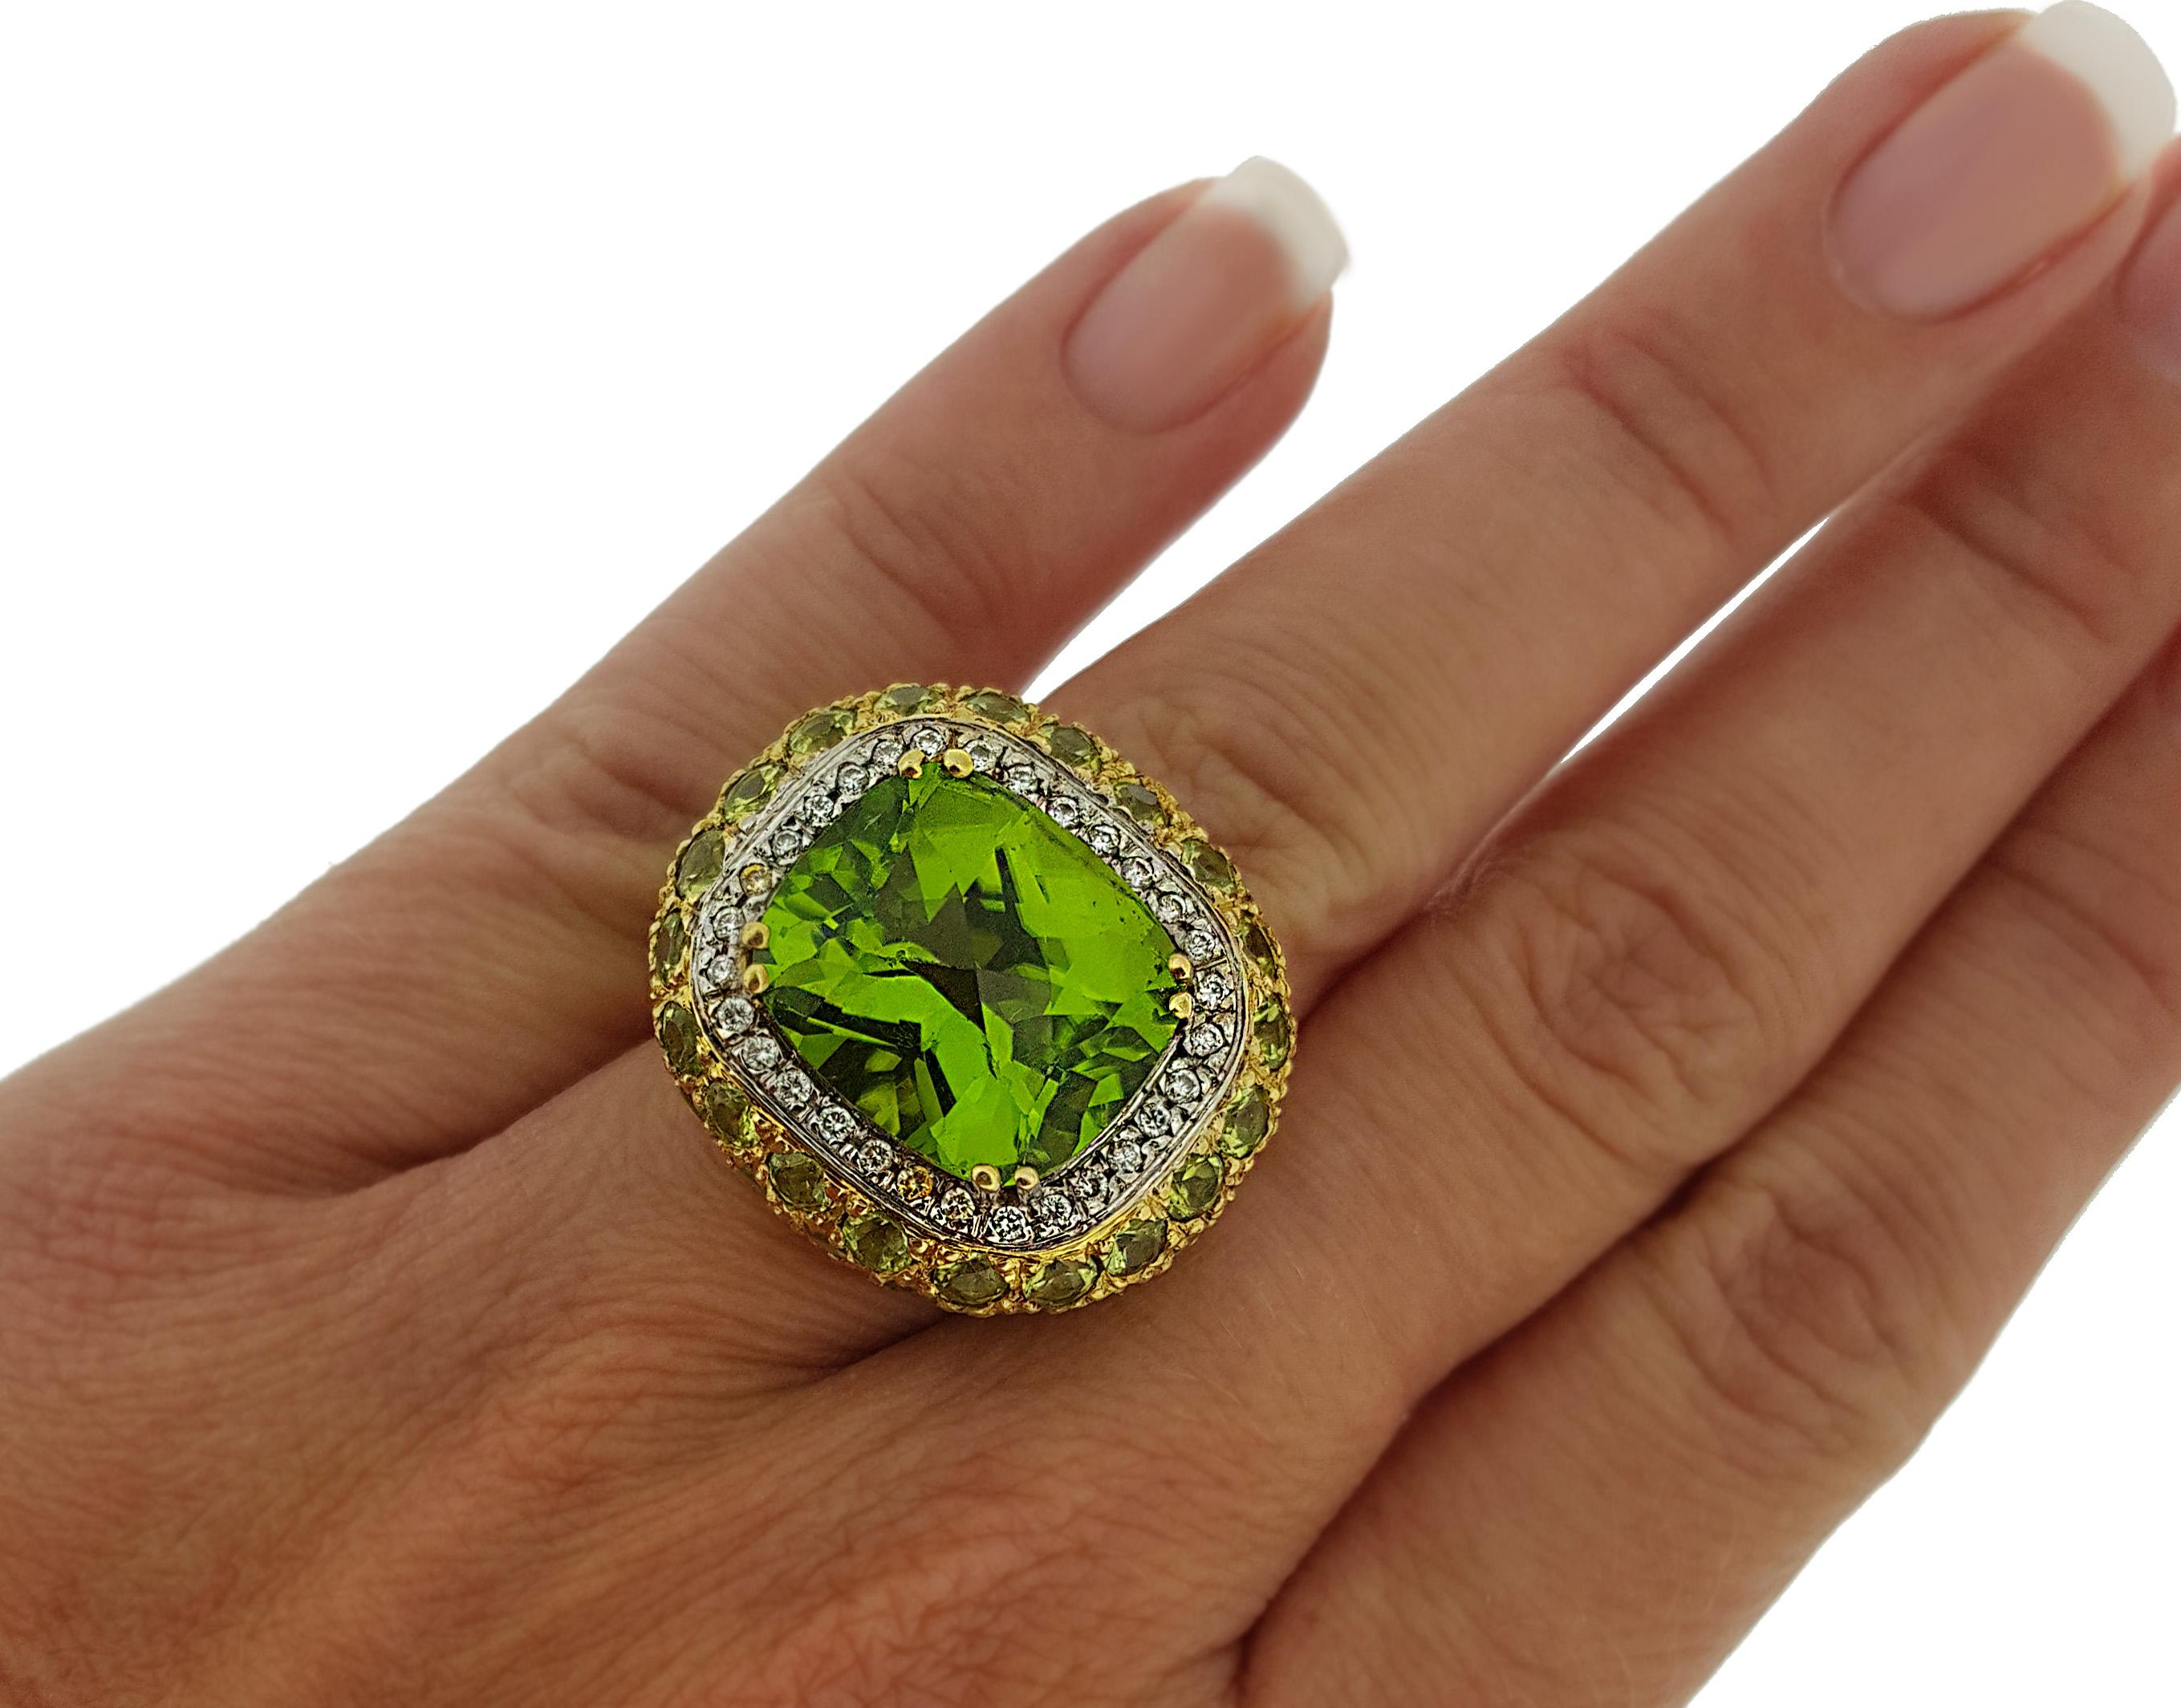 This eye catching cocktail ring showcases a vivid slightly yellowish green 20.64ct, eye-clean cushion shaped peridot perfectly framed by .30ctw of full cut round brilliant diamonds and 6.32 more carats of pave set peridot.  Set in rich 18kt yellow